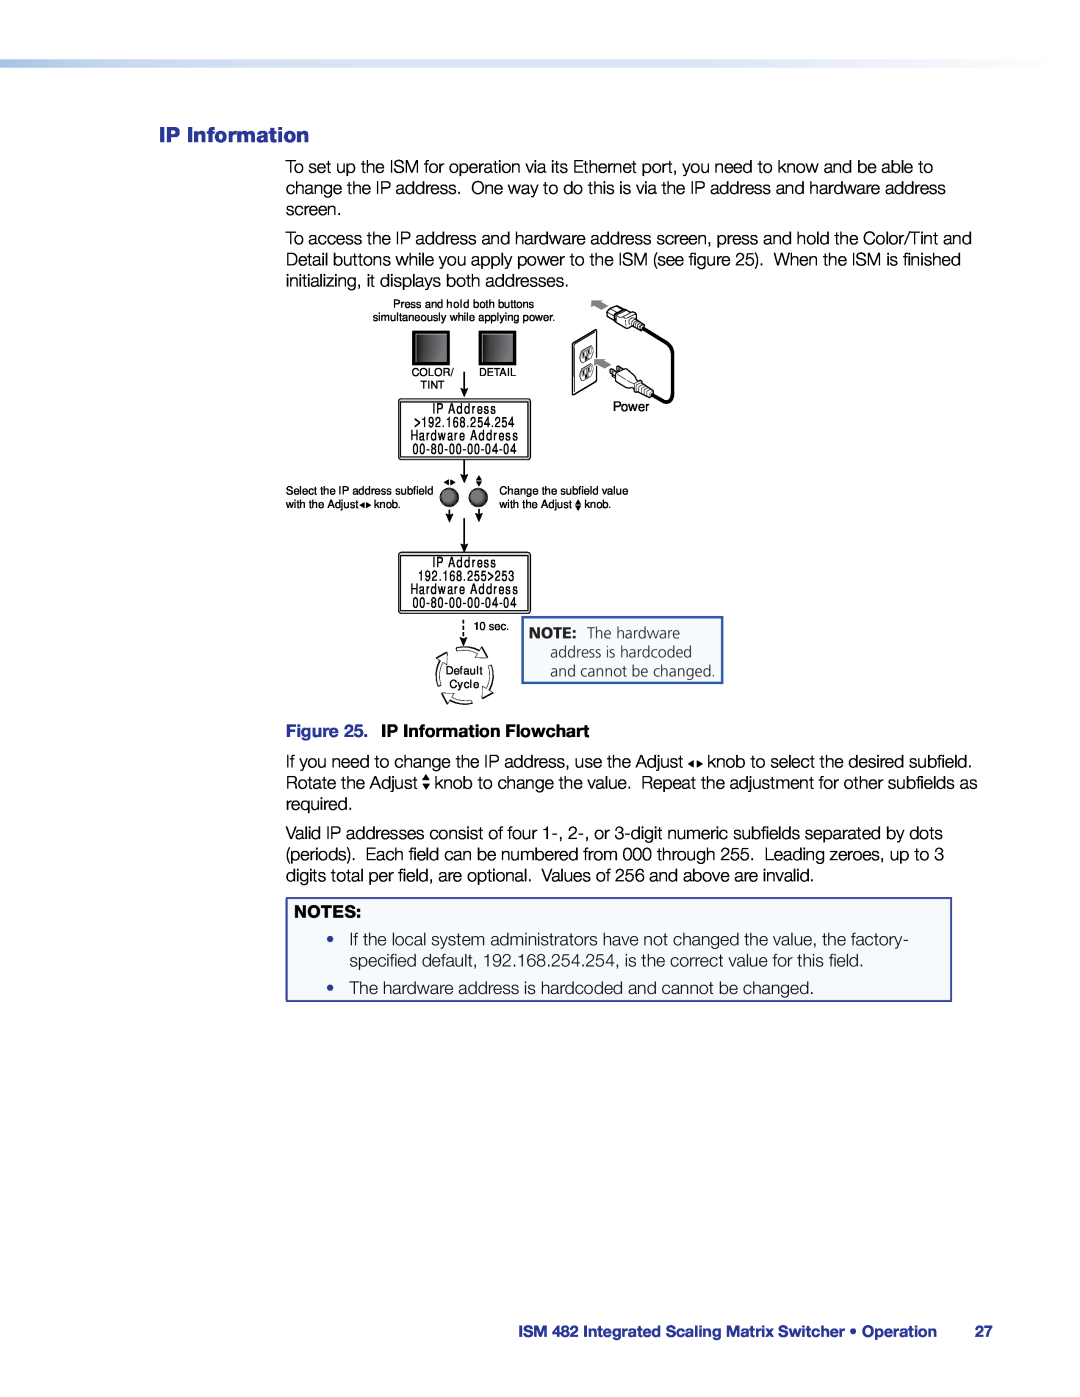 Extron electronic ISM 482 manual IP Information Flowchart 